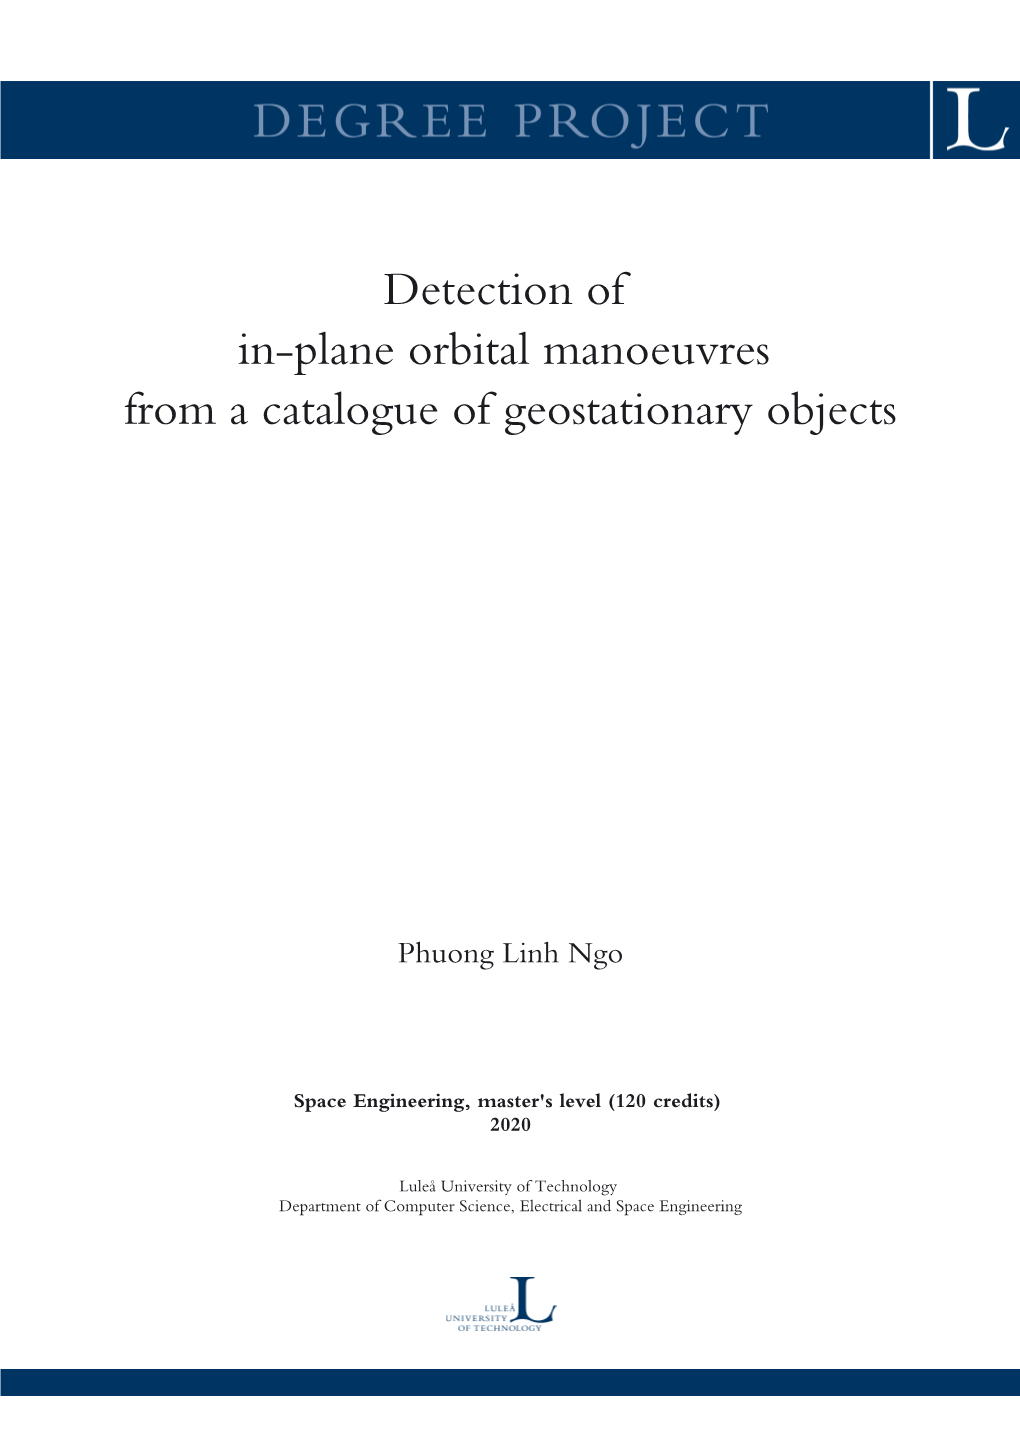 Detection of In-Plane Orbital Manoeuvres from a Catalogue of Geostationary Objects